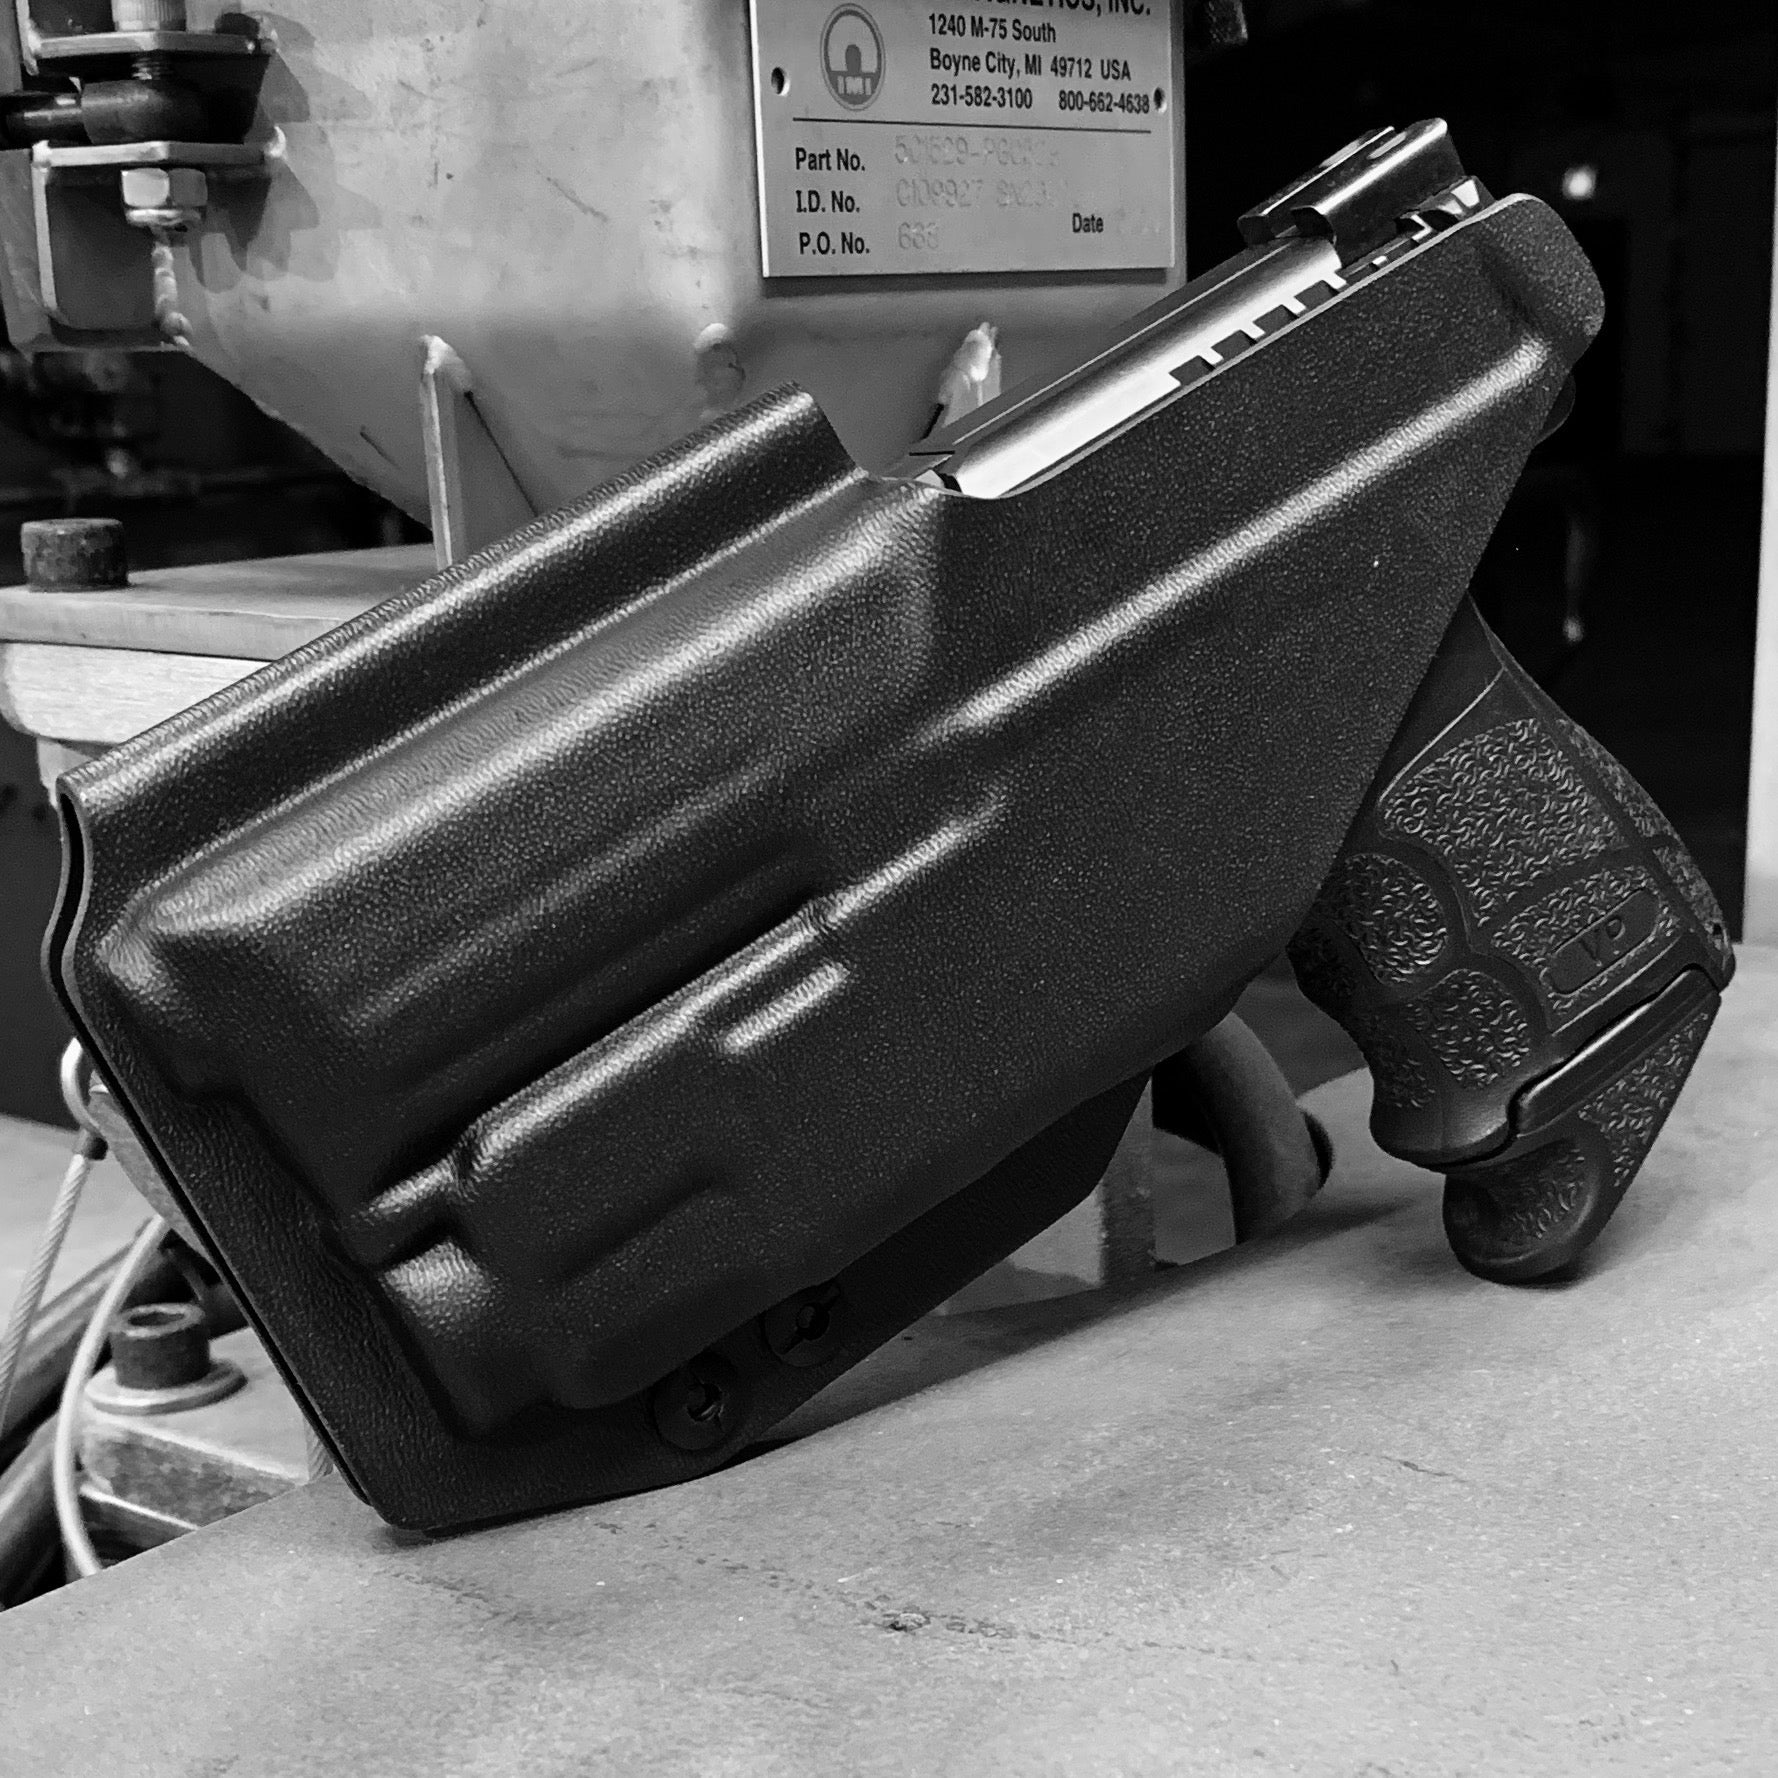 Inside Waistband IWB Holster designed to fit the Heckler & Koch H&K VP9 or VP9SK pistol with Streamlight TLR-7 or TLR-7A weapon mounted light. Full sweat guard, profile cut for red dot sights, adjustable retention, minimal material and smooth edges to reduce printing. Proudly made in the USA.